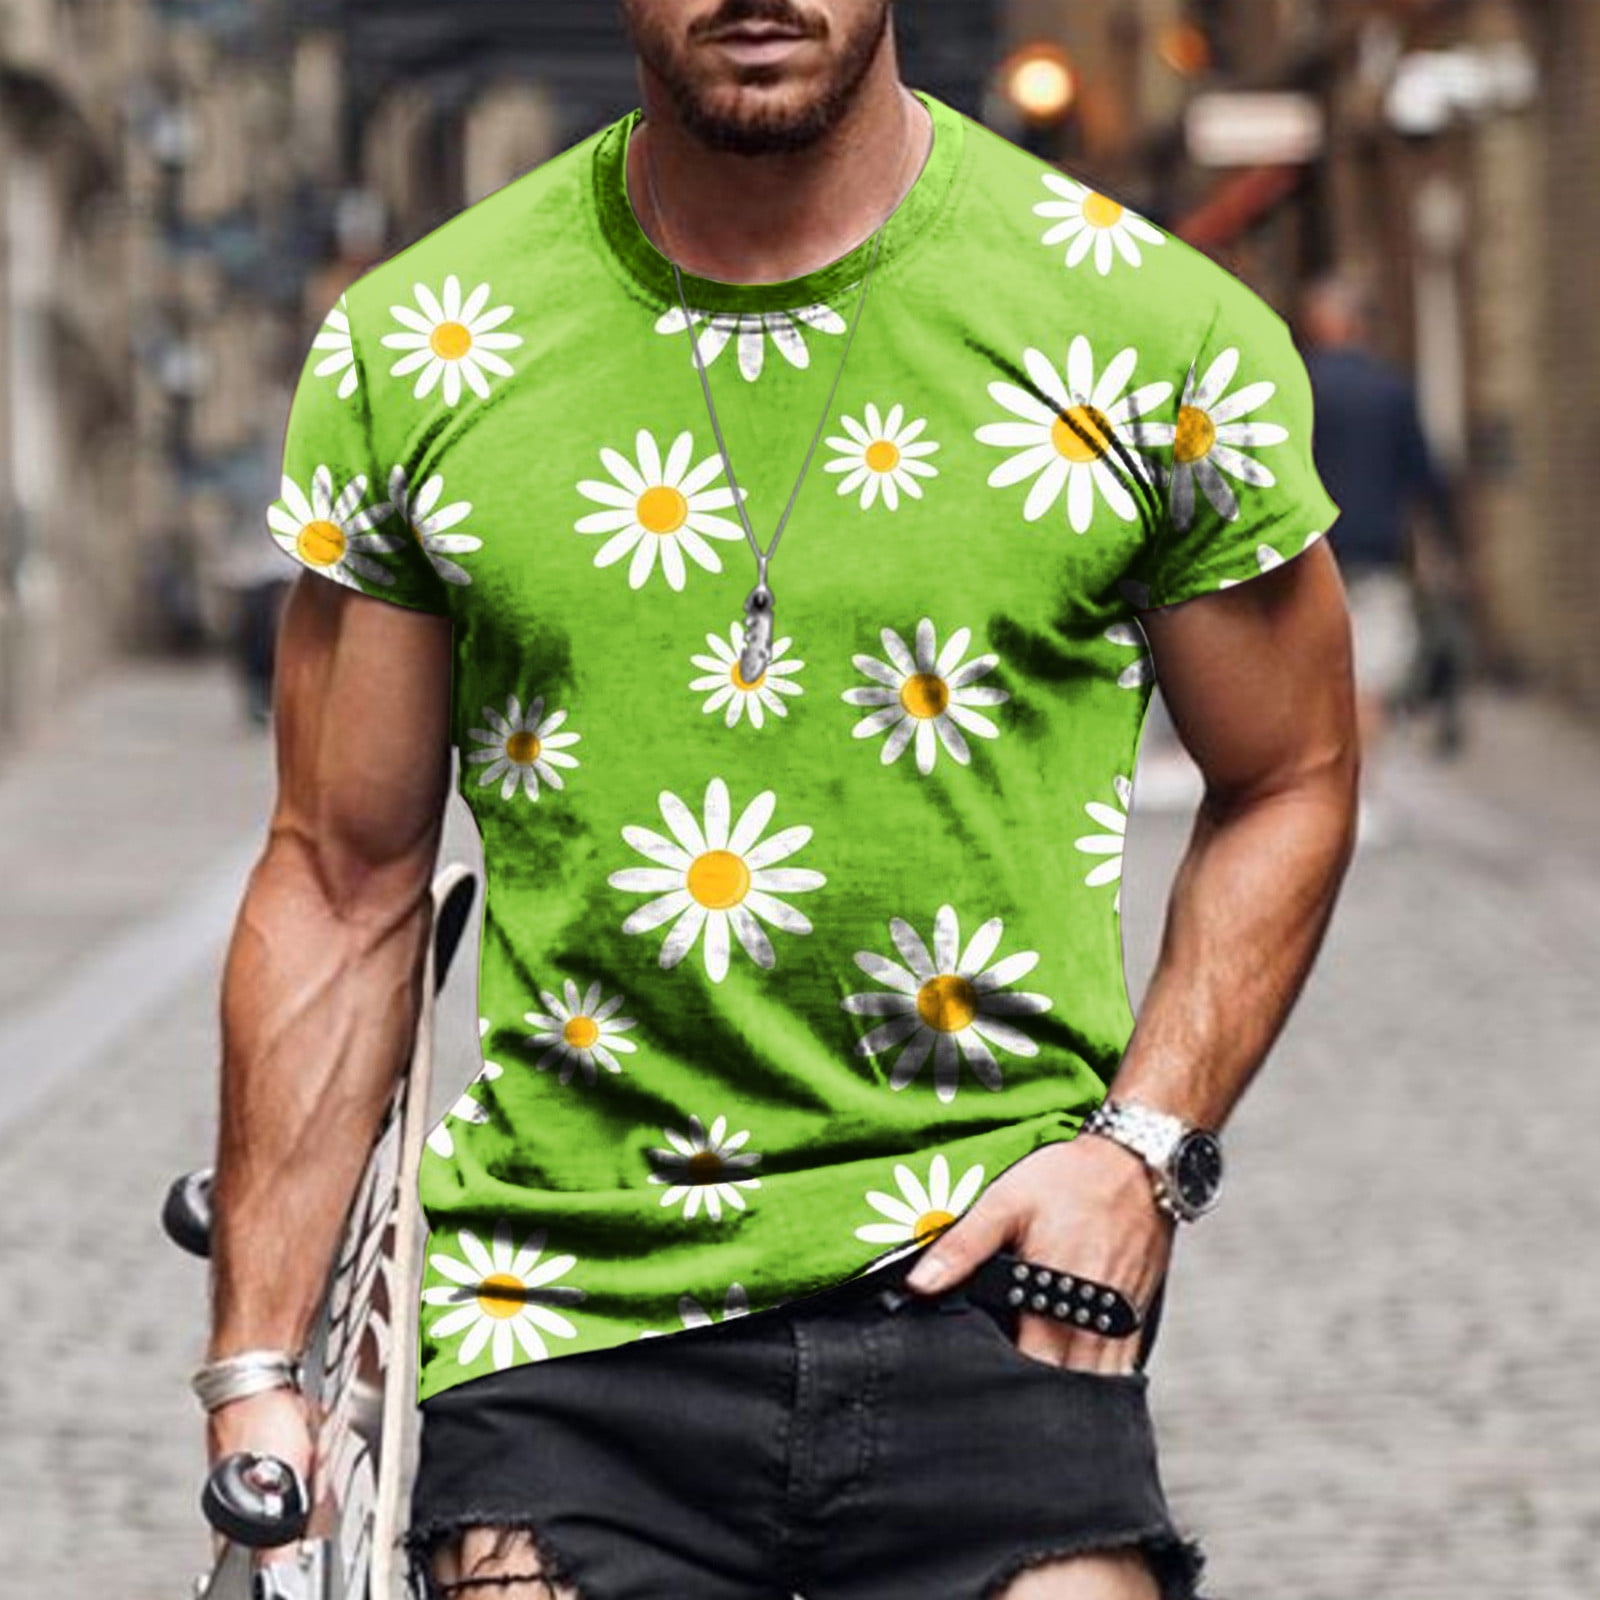 Frostluinai Savings Clearance 2023! Mens Gym Workout Slim Fit Short Sleeve  T-Shirt Athletic Shirts Running Fitness Tee Sunflowers Printed Pattern Tees  